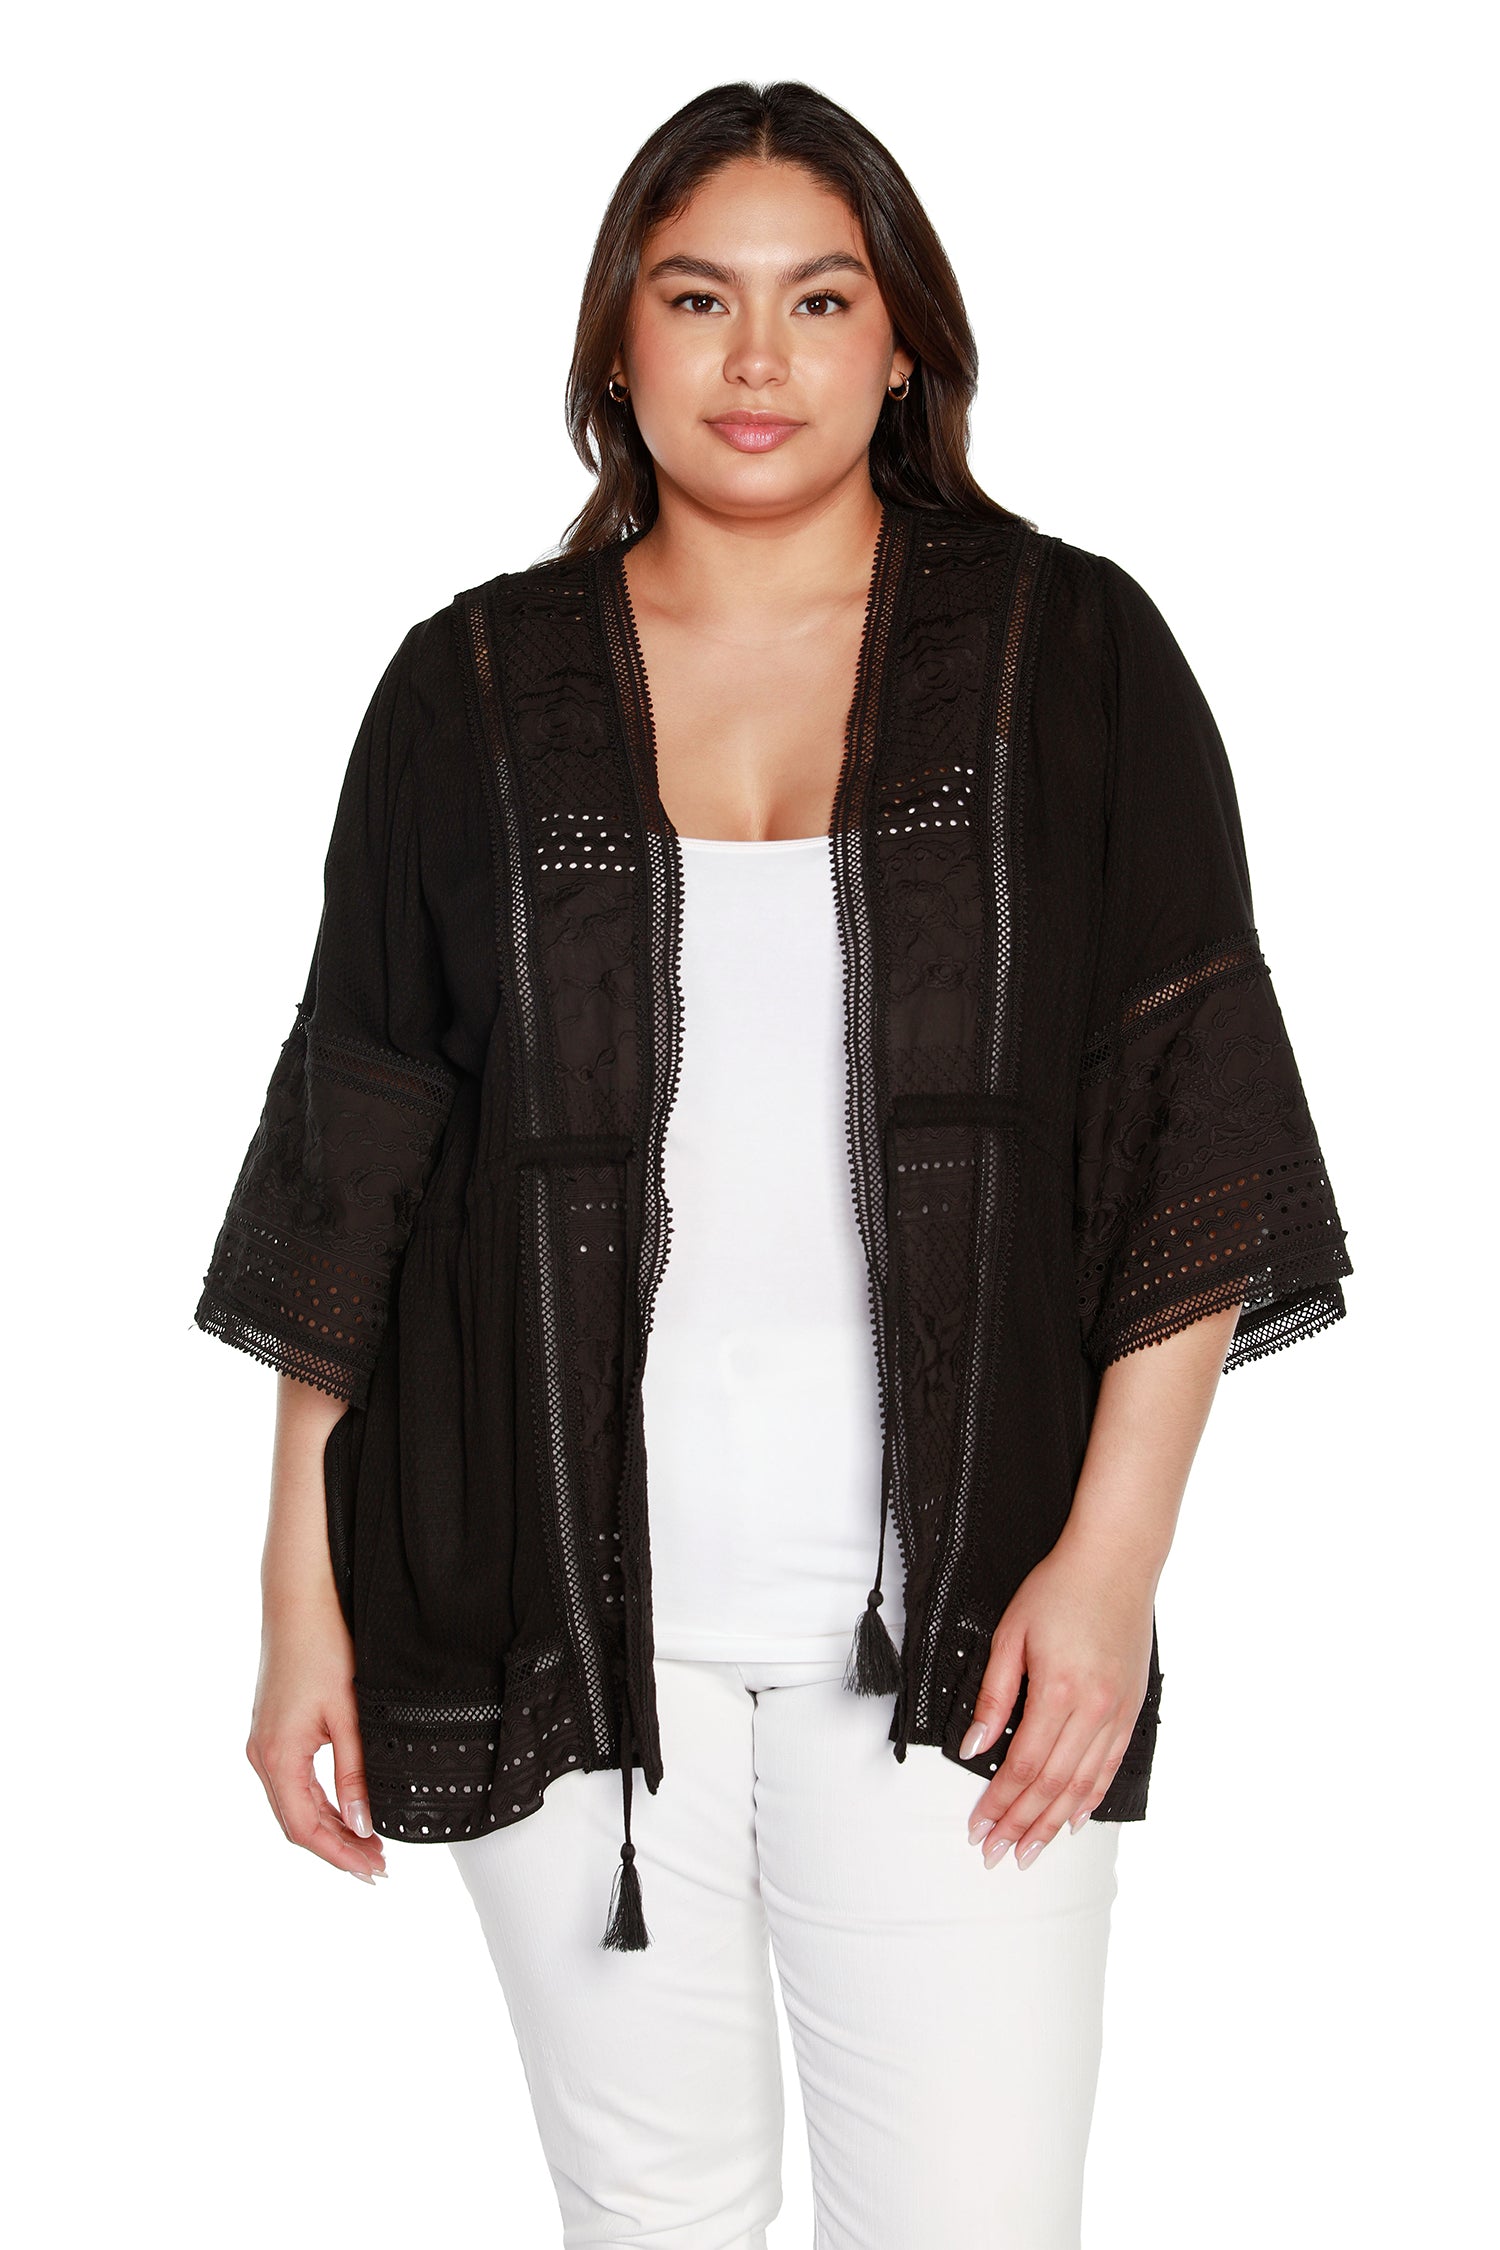 Women's Cotton Kimono with Eyelet Lace and Embroidery | Curvy